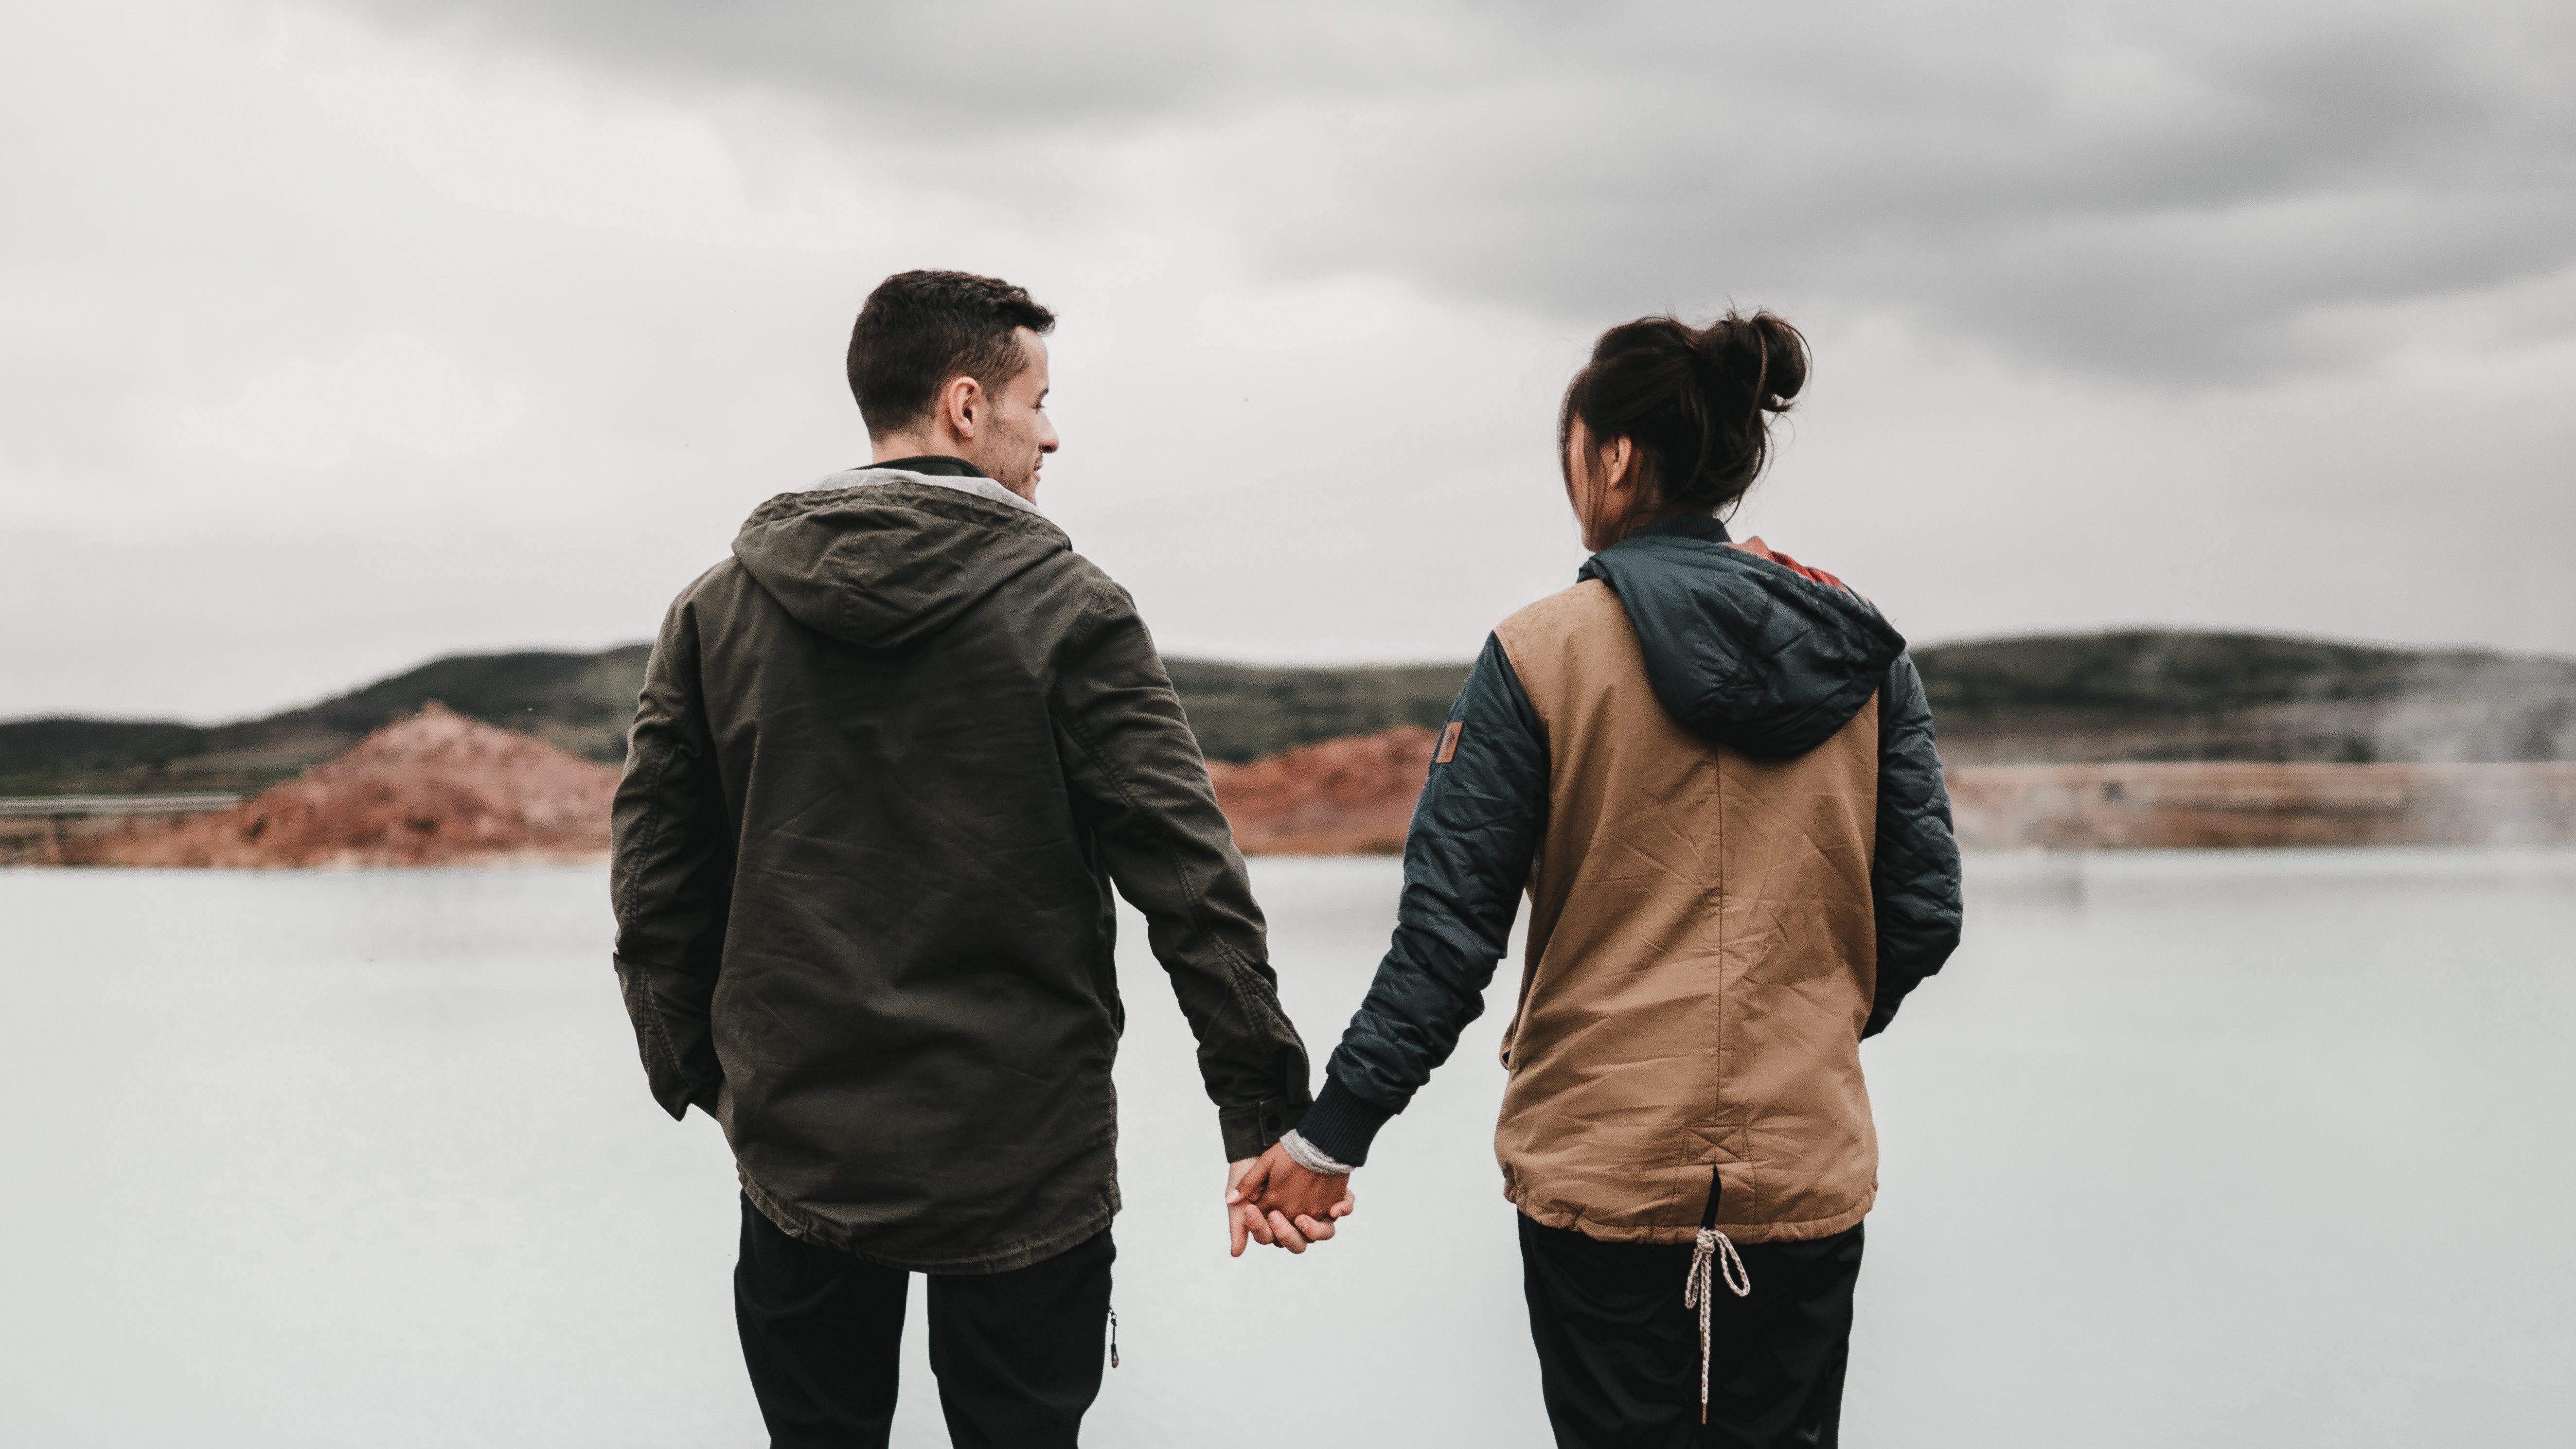 How These Relationship Goals Are Great For A Healthy Relationship